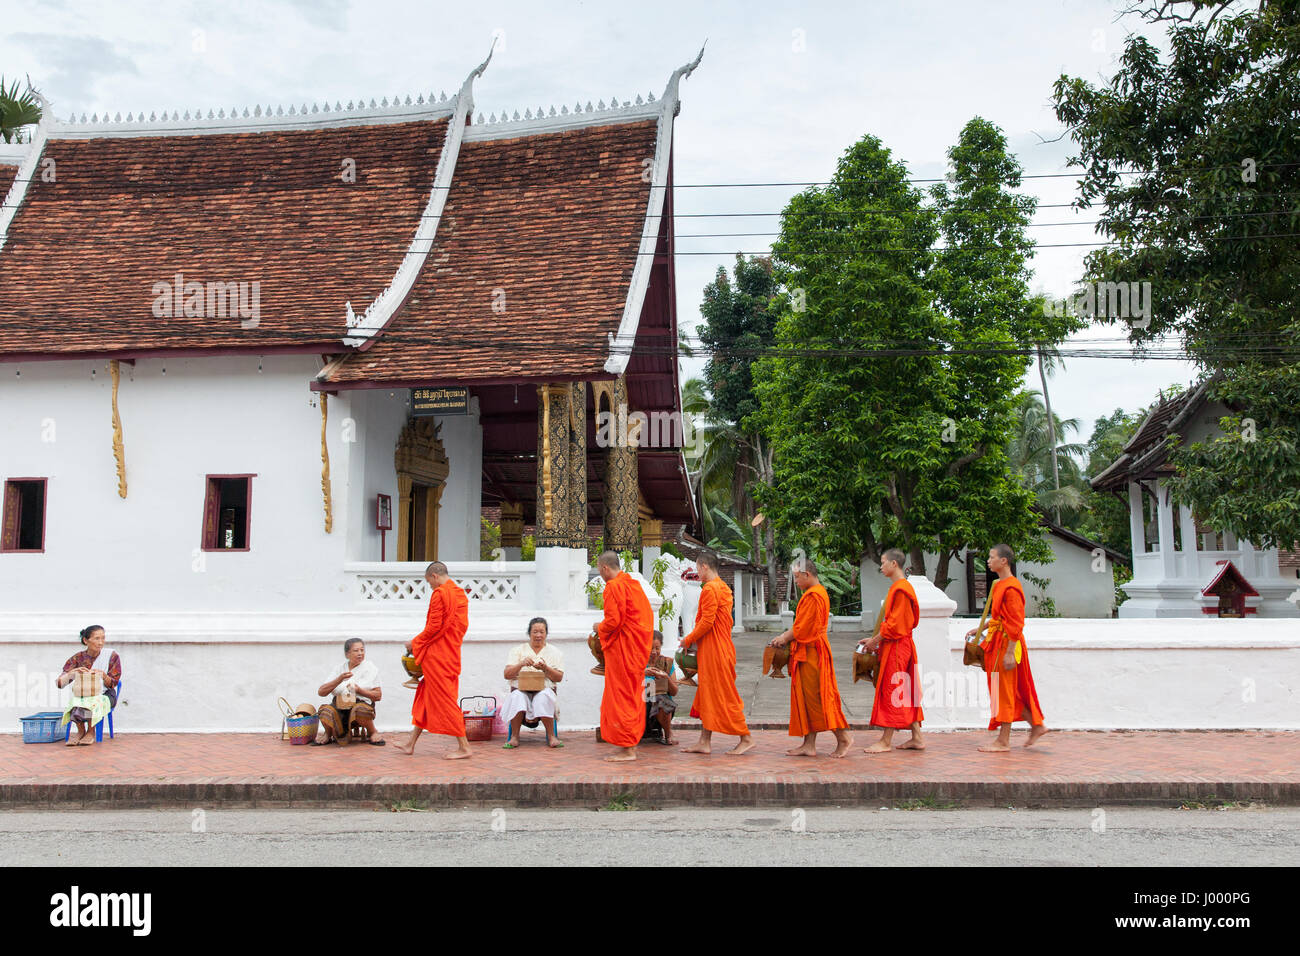 Luang Prabang, Laos - 22 June, 2014: Buddhist monks collecting alms from people on the street of Luang Prabang, Laos on 22 June, 2014. Stock Photo